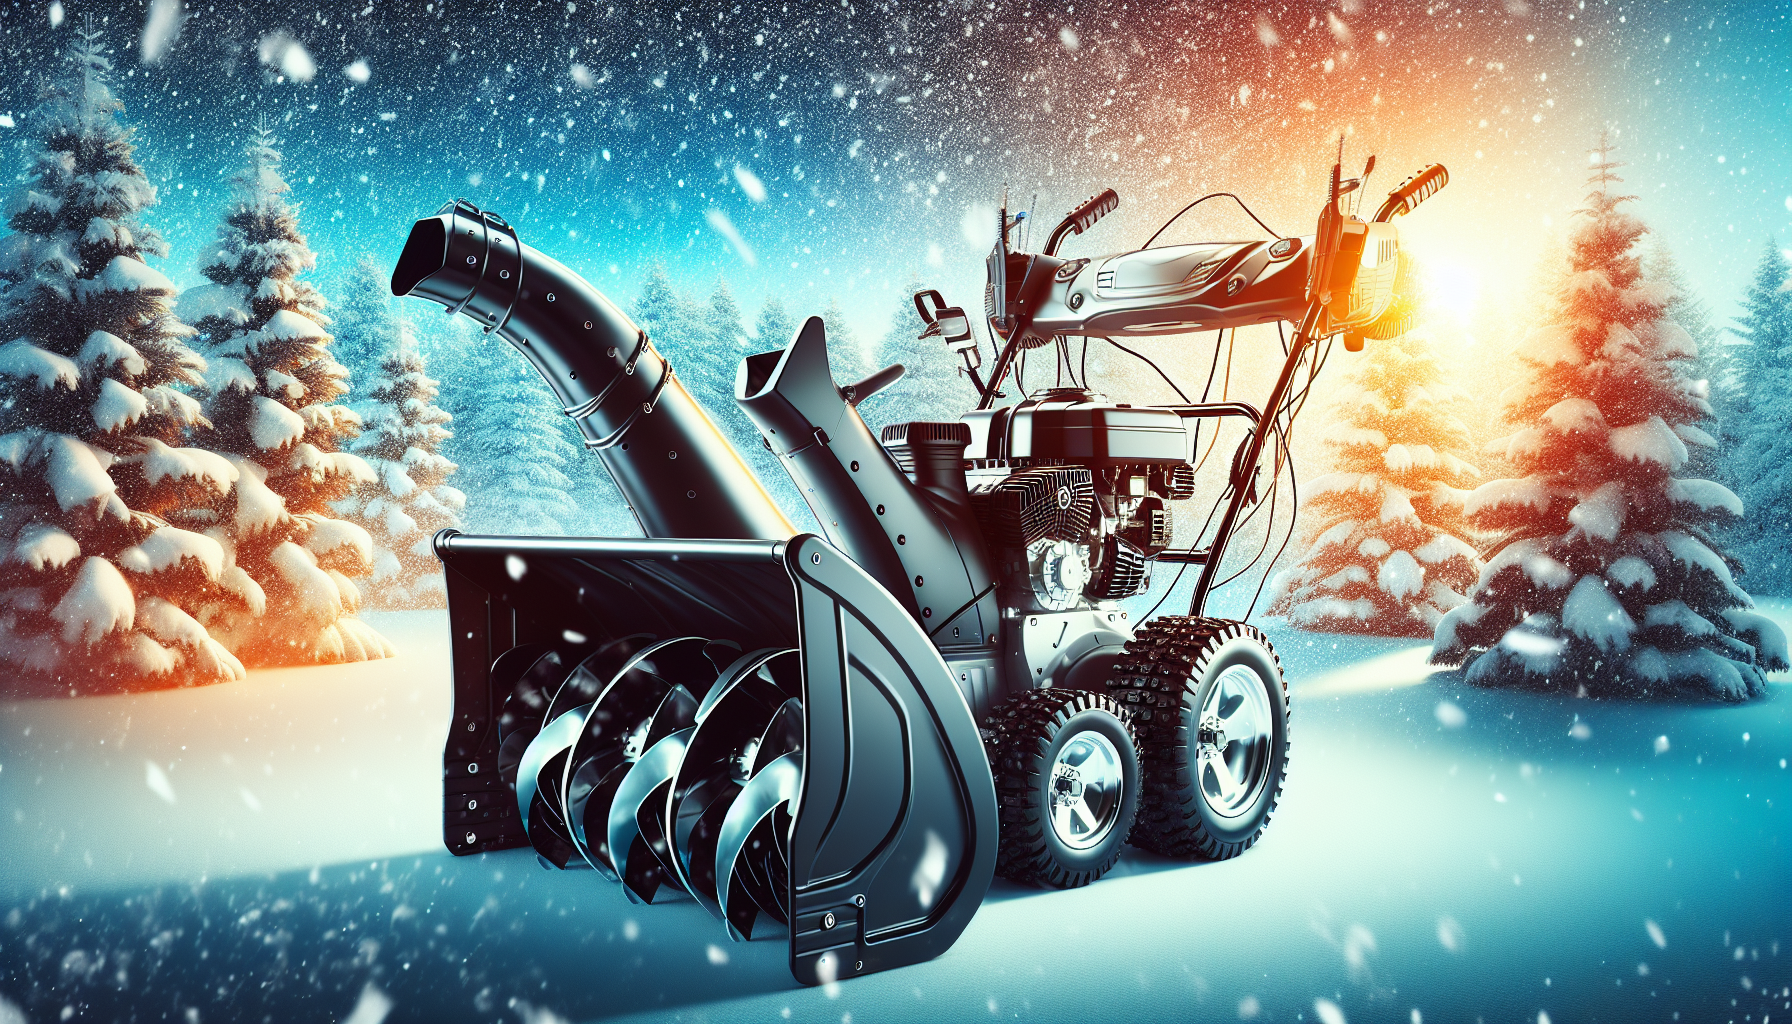 What Is A Good Snow Blower For A Driveway?